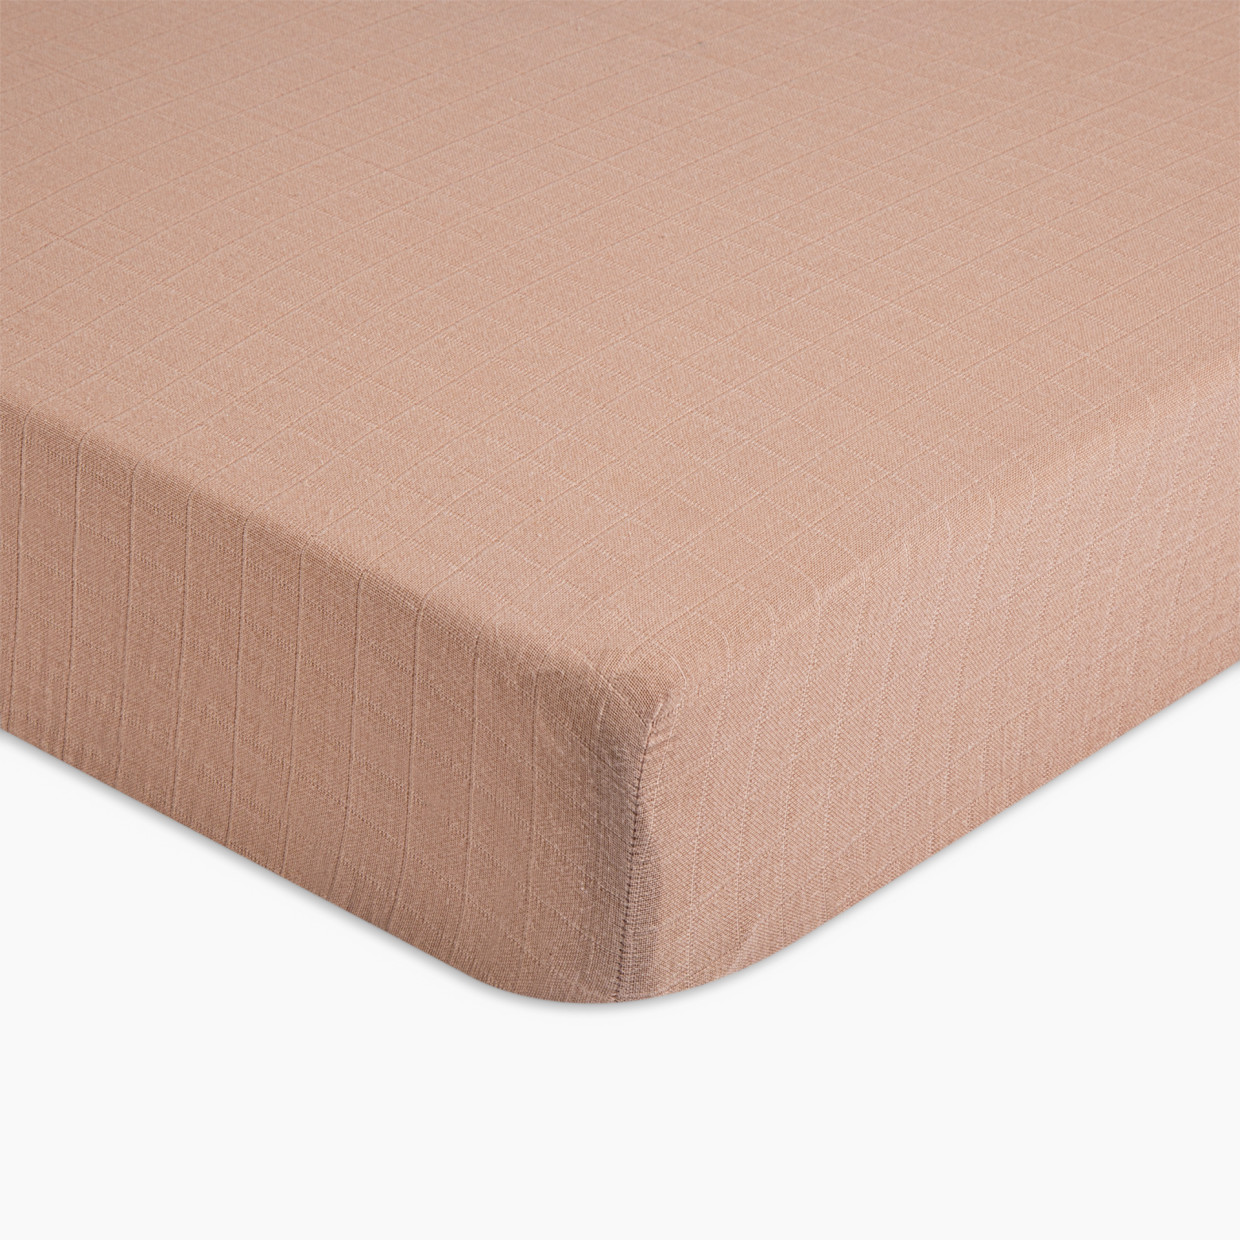 Crane Baby Cotton Muslin Crib Fitted Sheet - Copper.